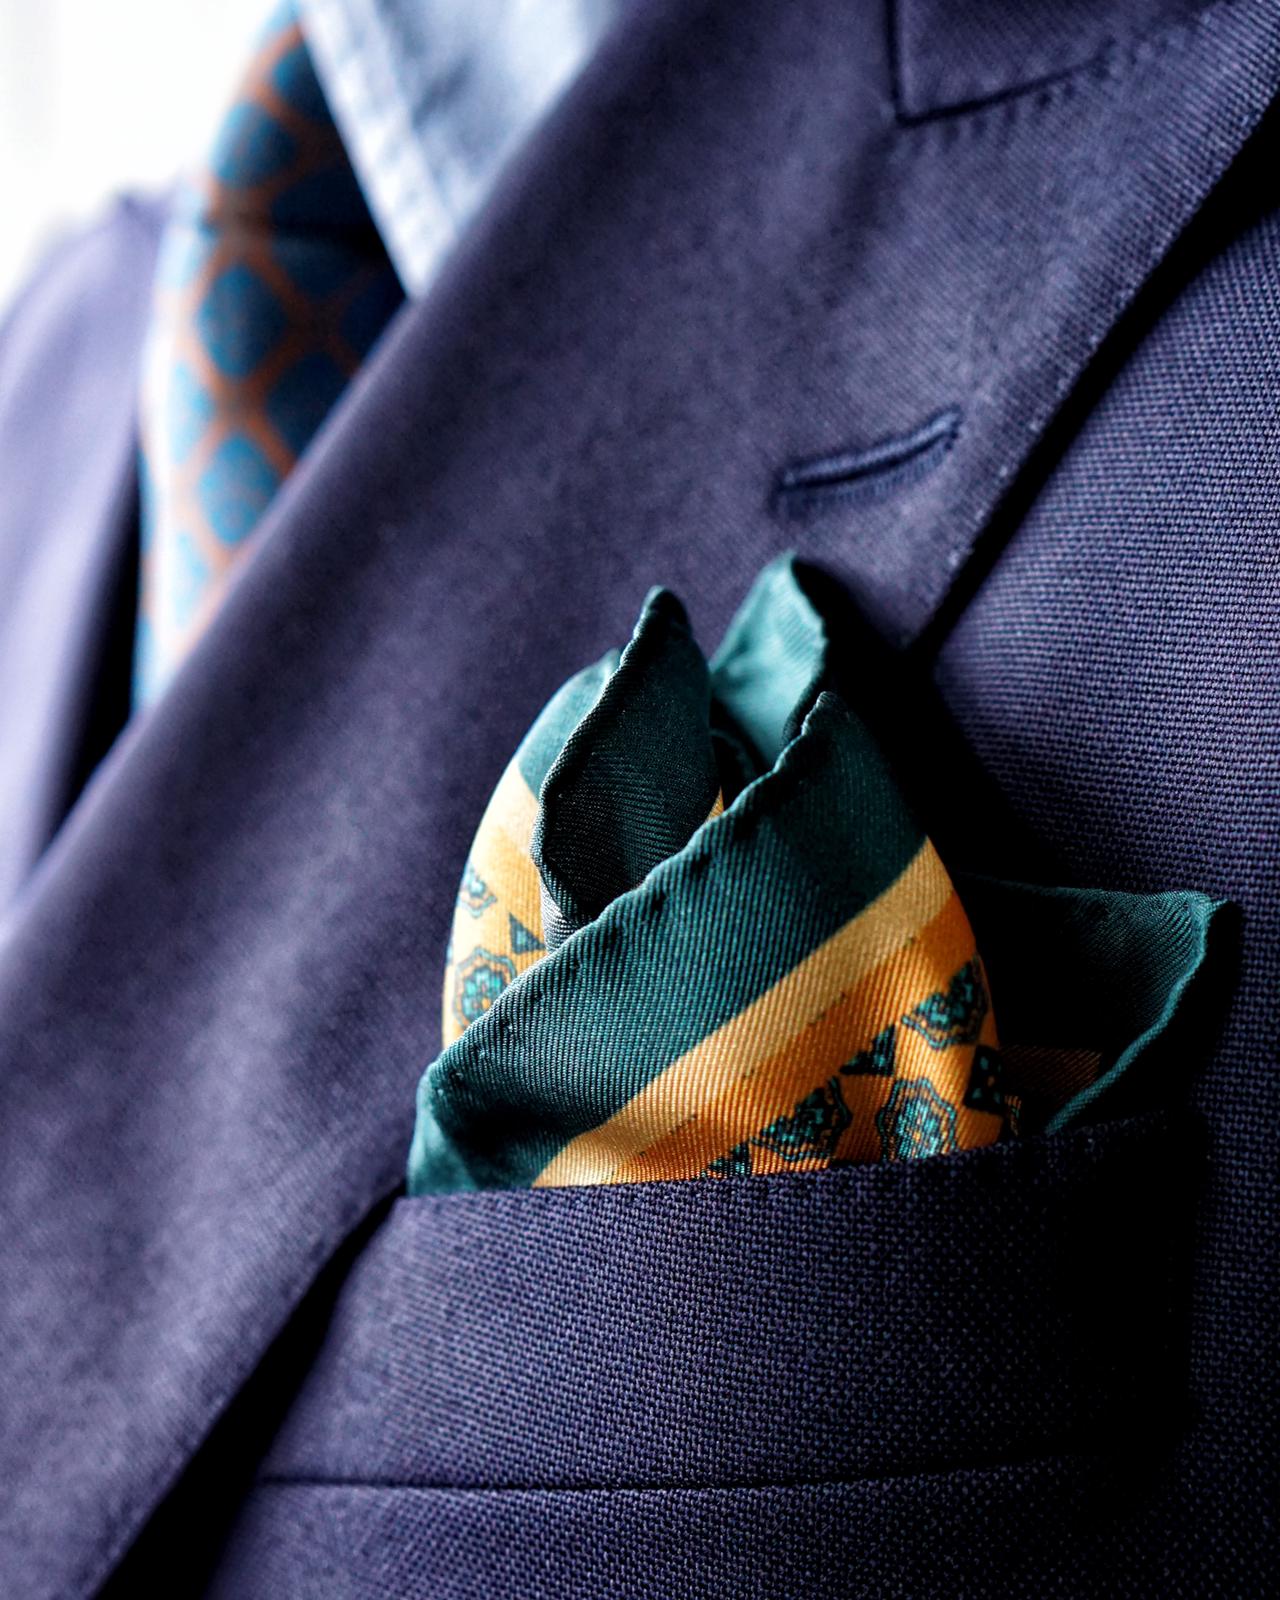 3 ways to wear a pocket square